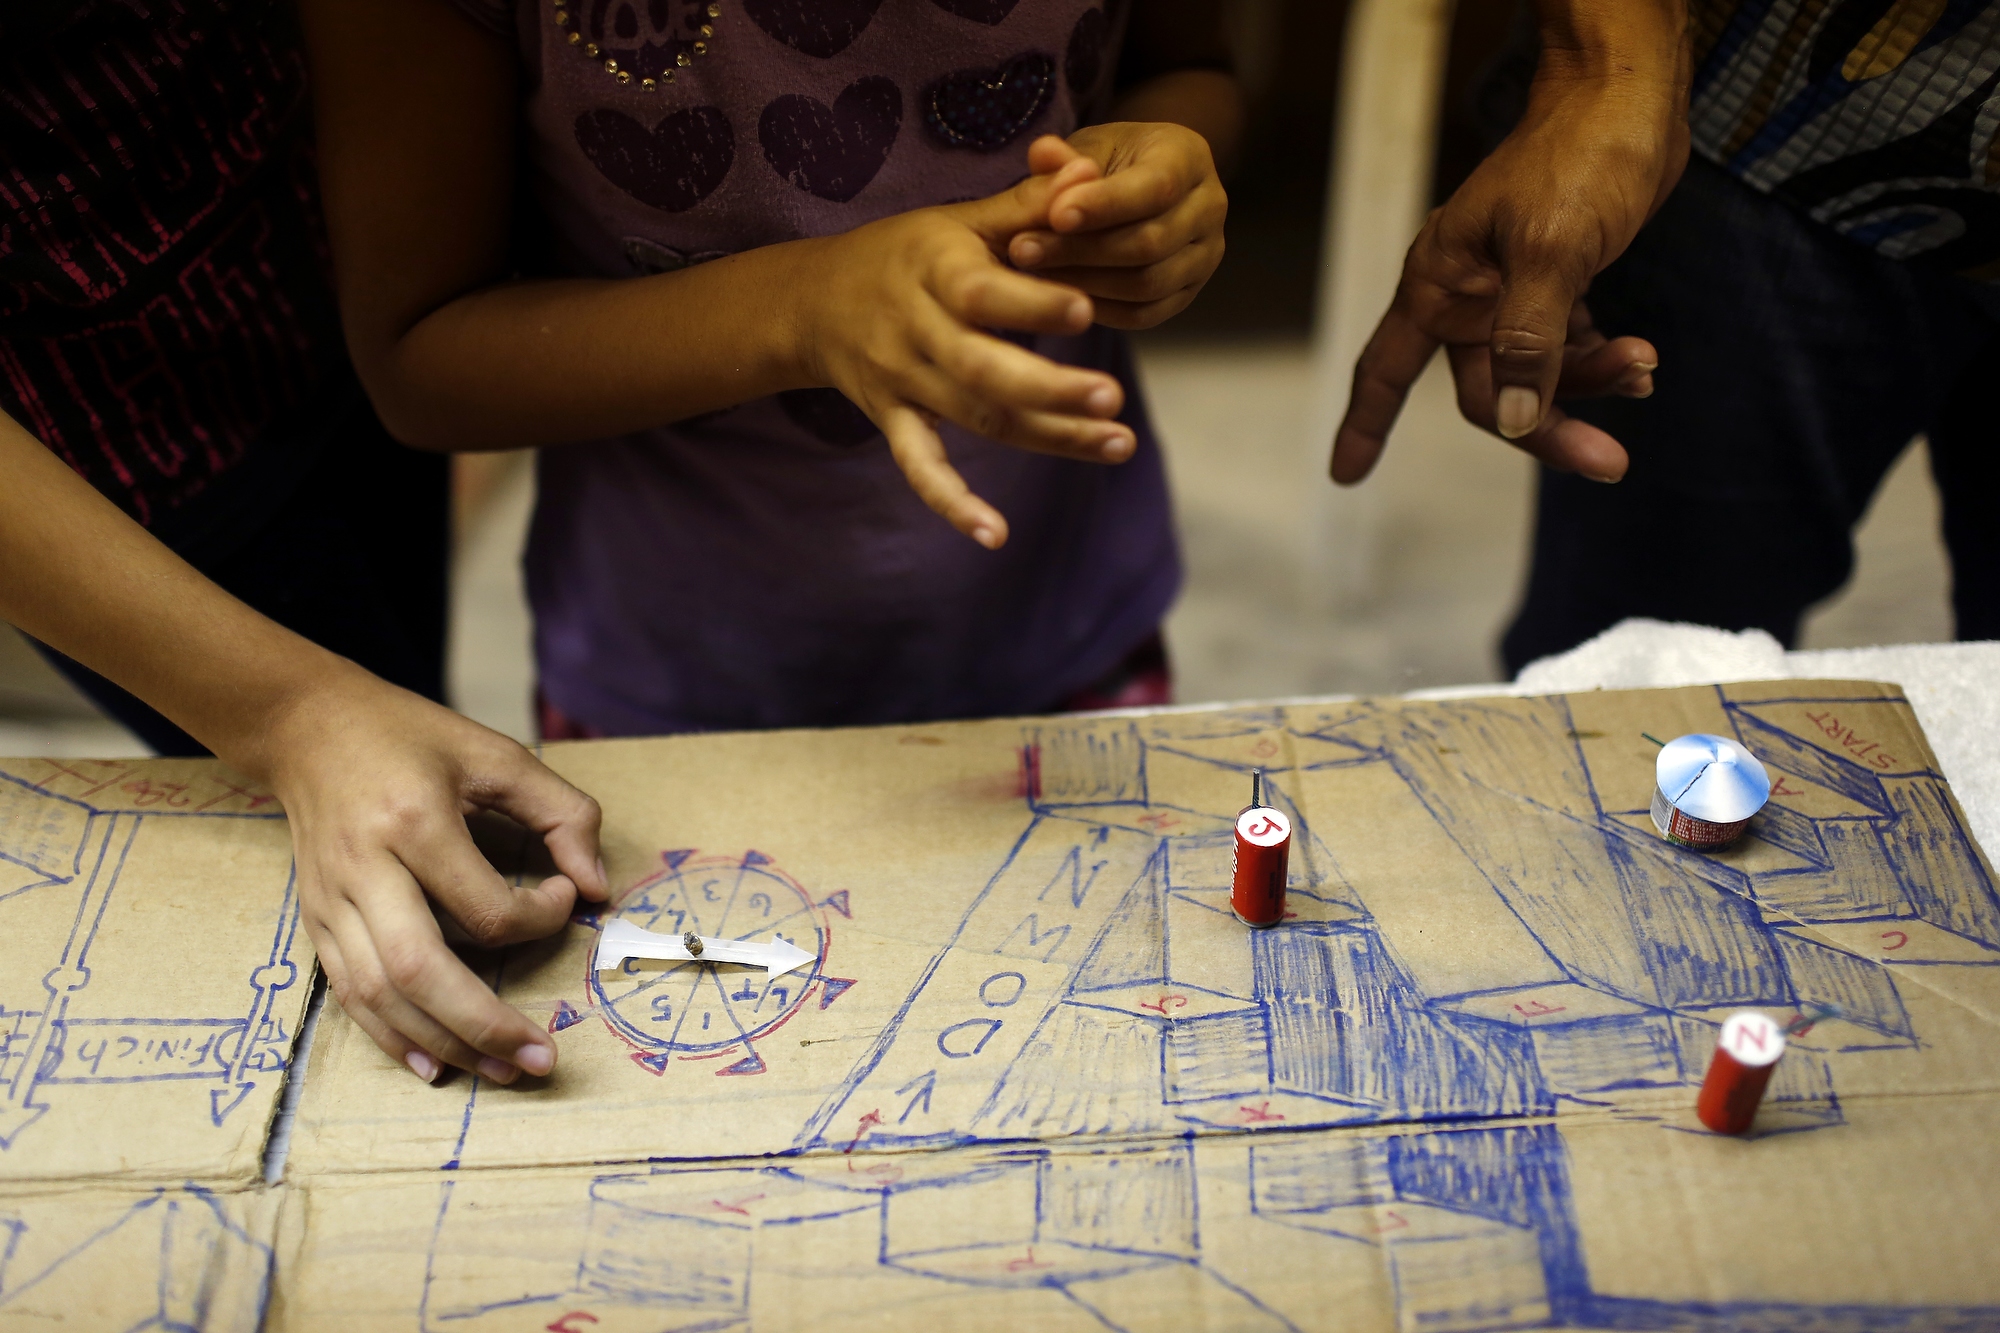 The young girls and Cynthia play a homemade board game with firecrackers as gamepieces, Hidalgo, Texas, July 1, 2014.